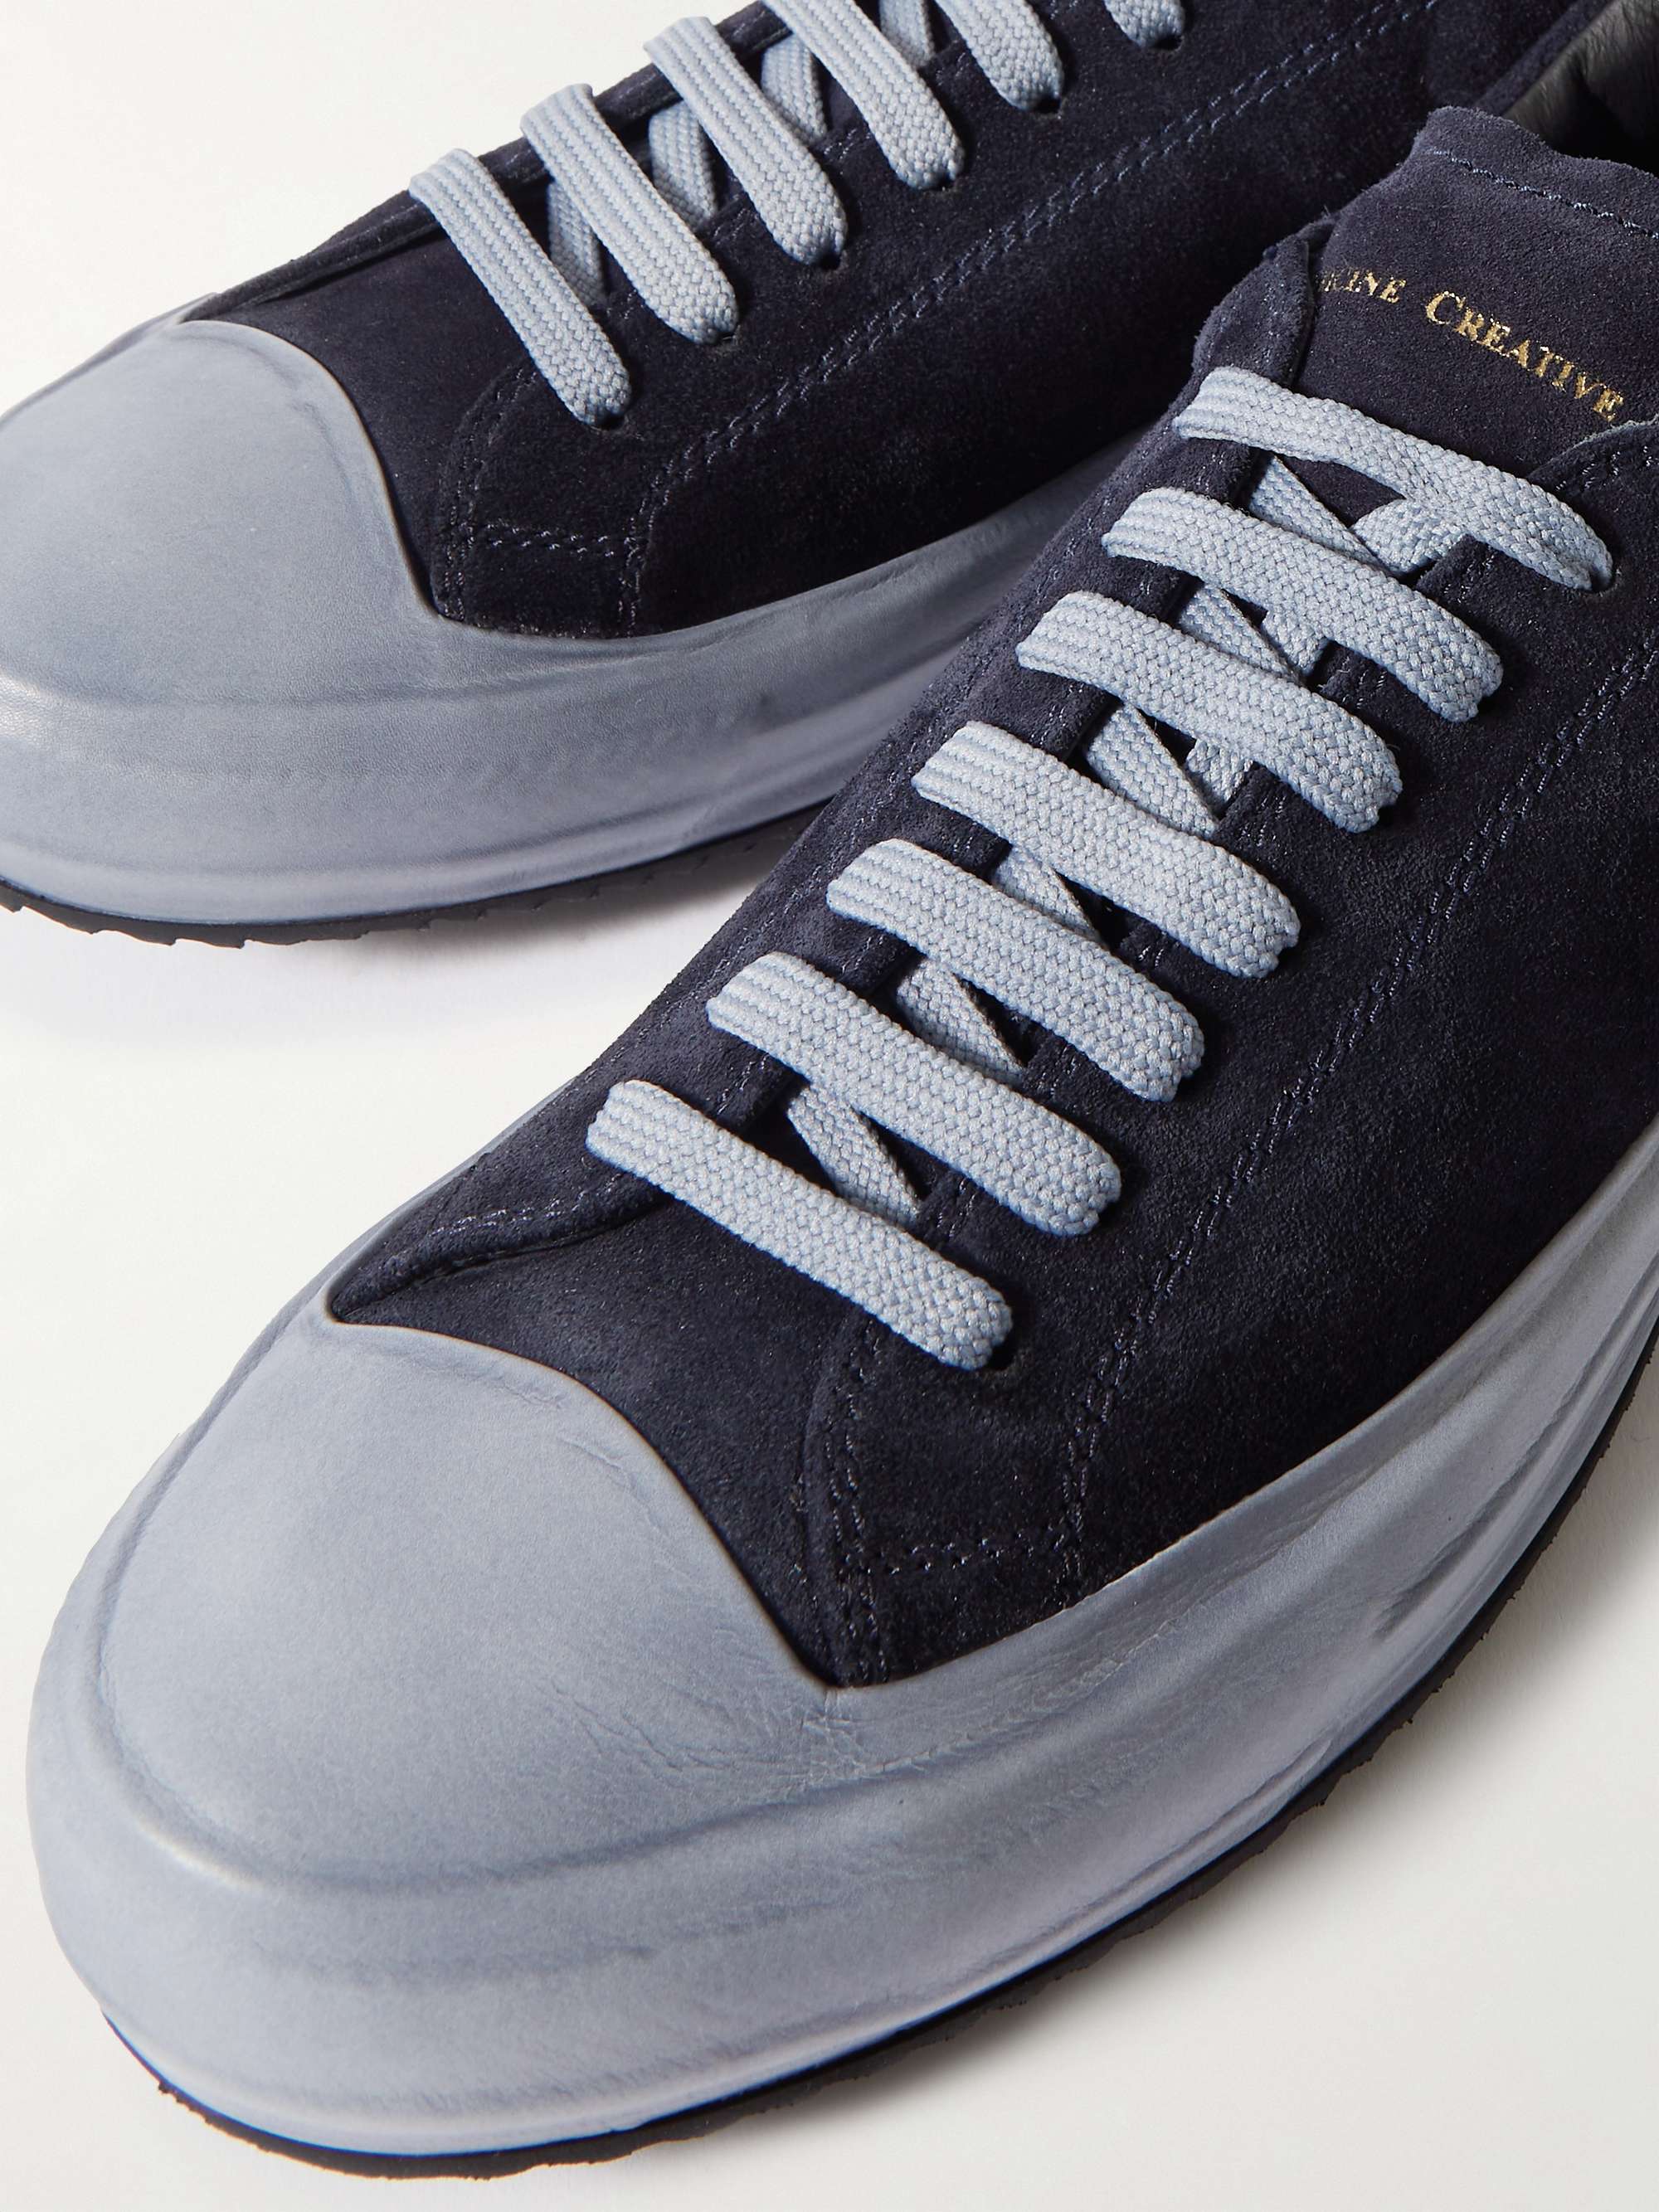 OFFICINE CREATIVE Mes Suede Sneakers | MR PORTER